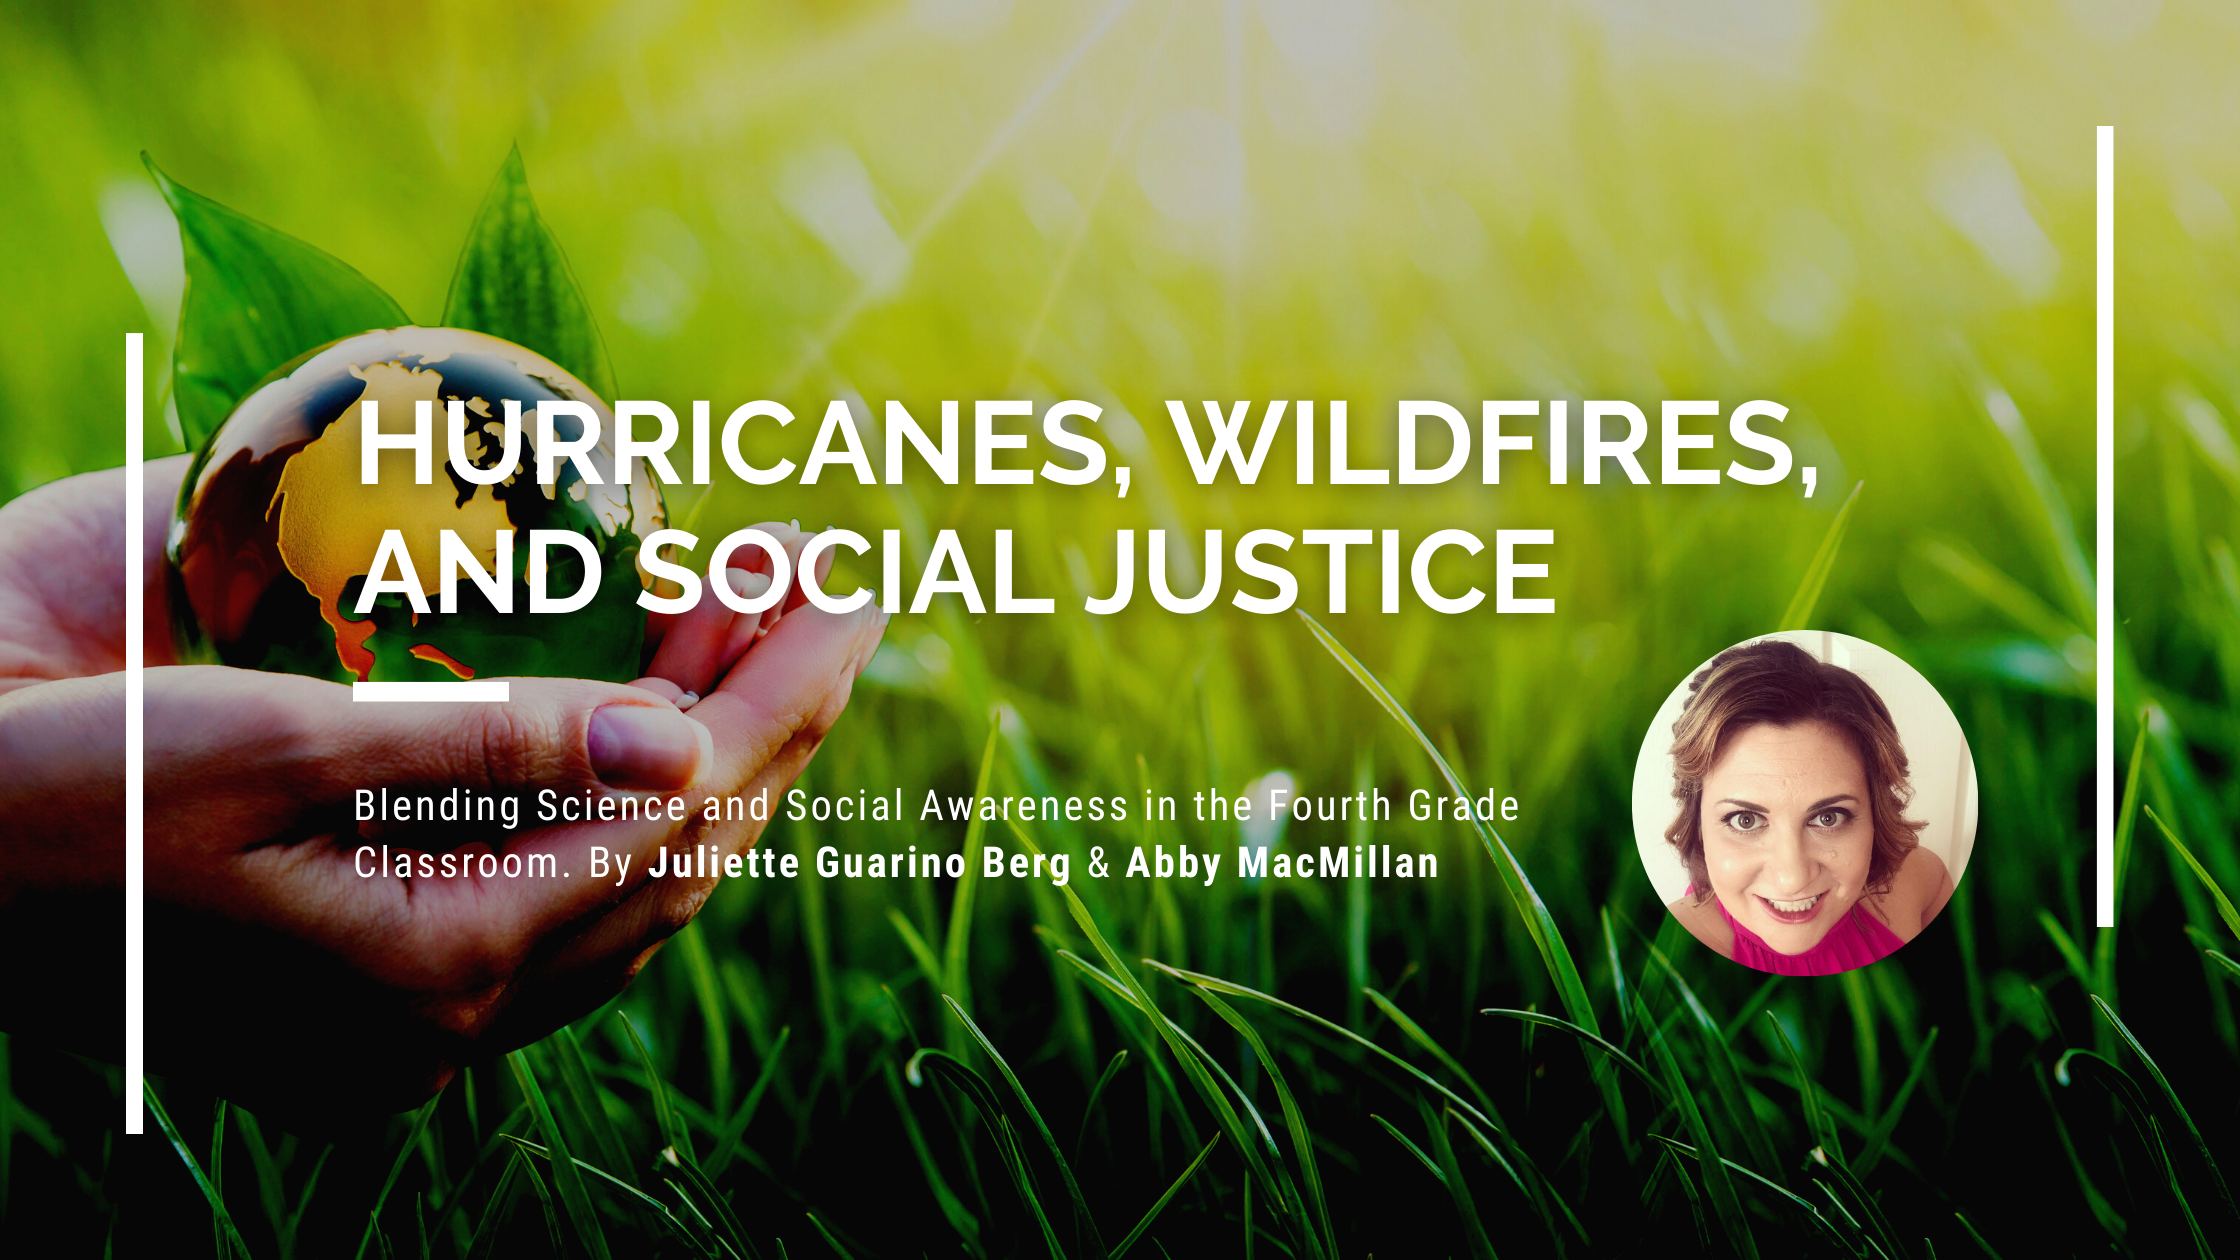 Hurricanes, Wildfires, and Social Justice: Blending Science and Social Awareness in the Fourth Grade Classroom